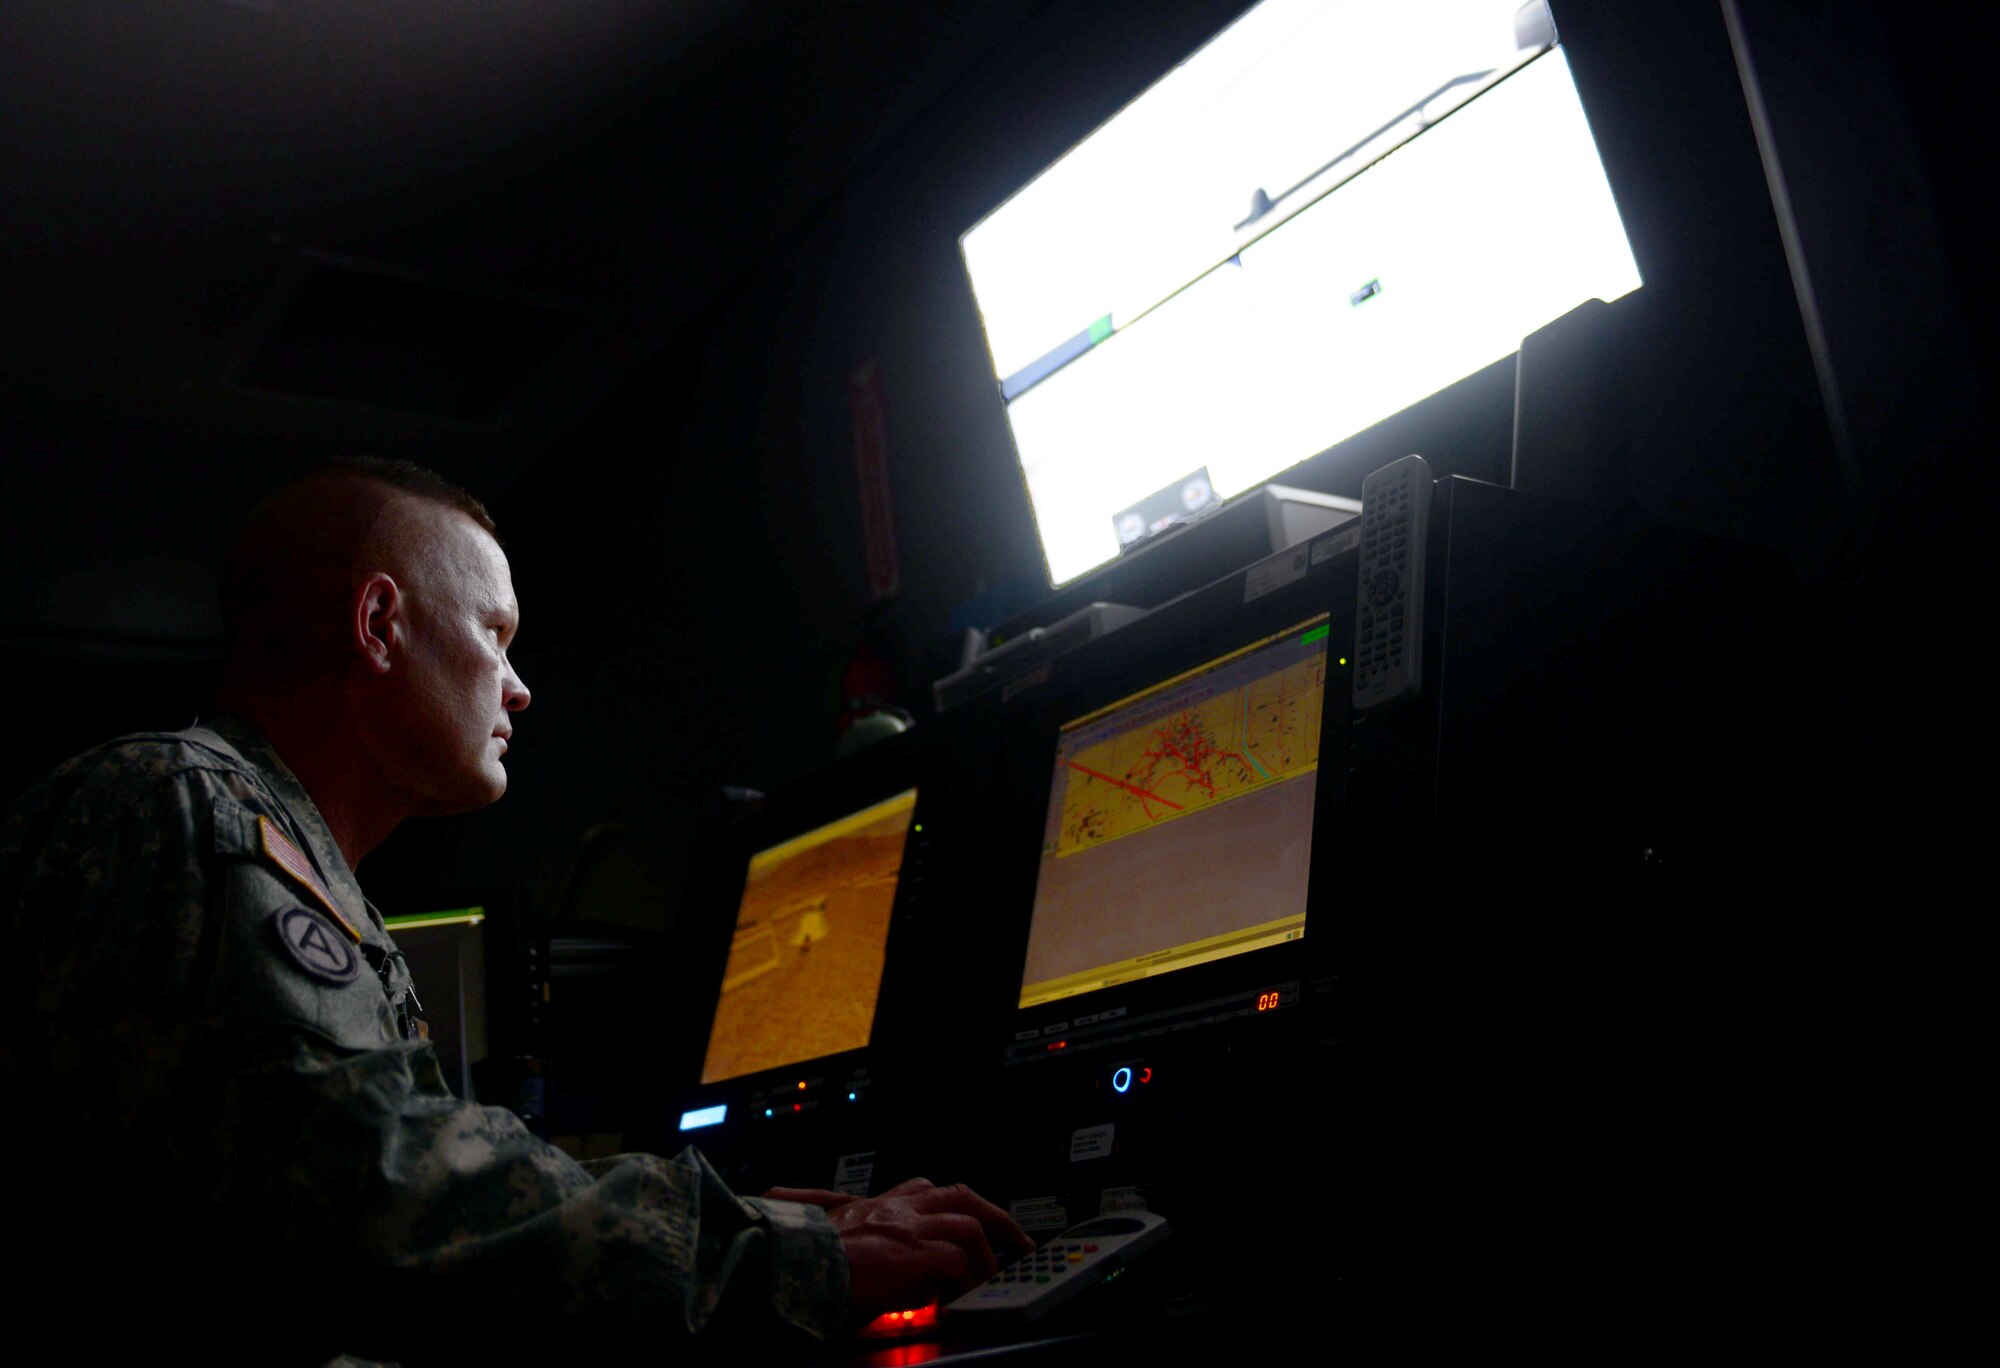 U.S. Army Staff Sgt. Mario Volmer, a range operator assigned to the South Dakota Army National Guard Training Center, programs obstacles for Ellsworth Airmen training in the virtual convoy at Camp Rapid, S.D., June 15, 2017. The virtual convoy is a multiple-station simulator that presents real-world convoy scenarios that Soldiers and Airmen may face overseas in contingency operations. (U.S. Air Force photo by Airman 1st Class Donald C. Knechtel)